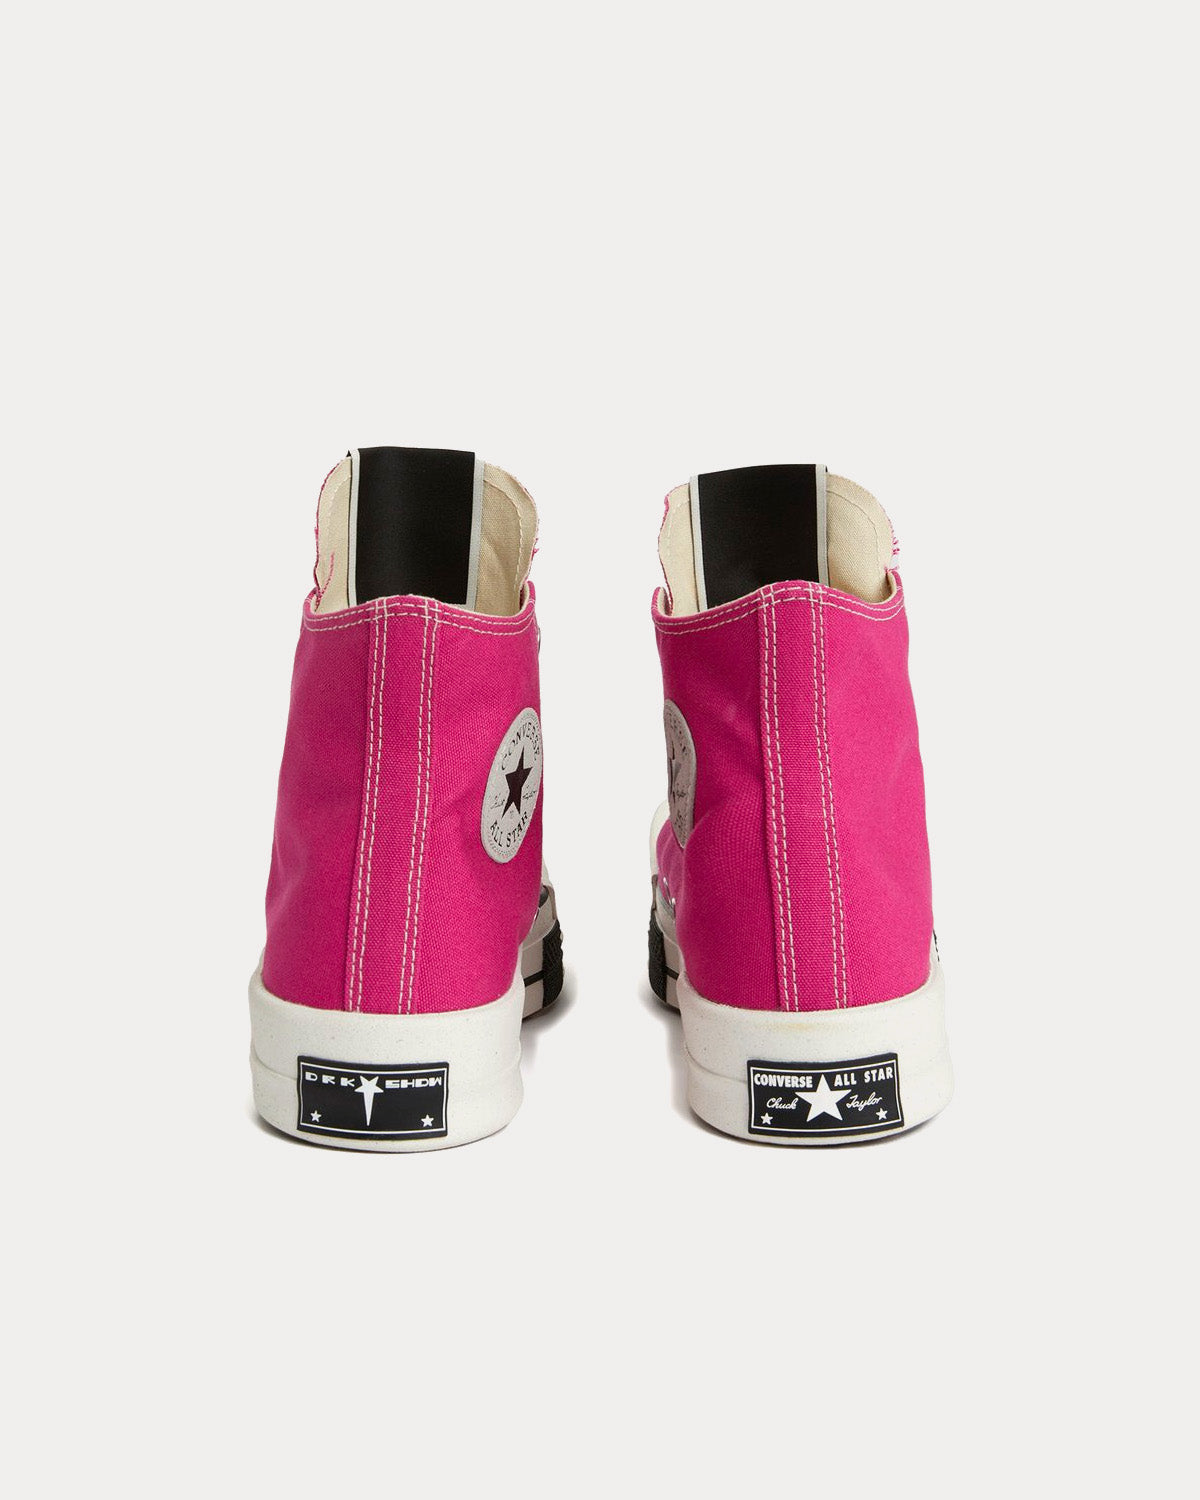 Converse x Rick Owens DRKSHDW - Chuck 70 Laceless Hot Pink / White High Top Sneakers